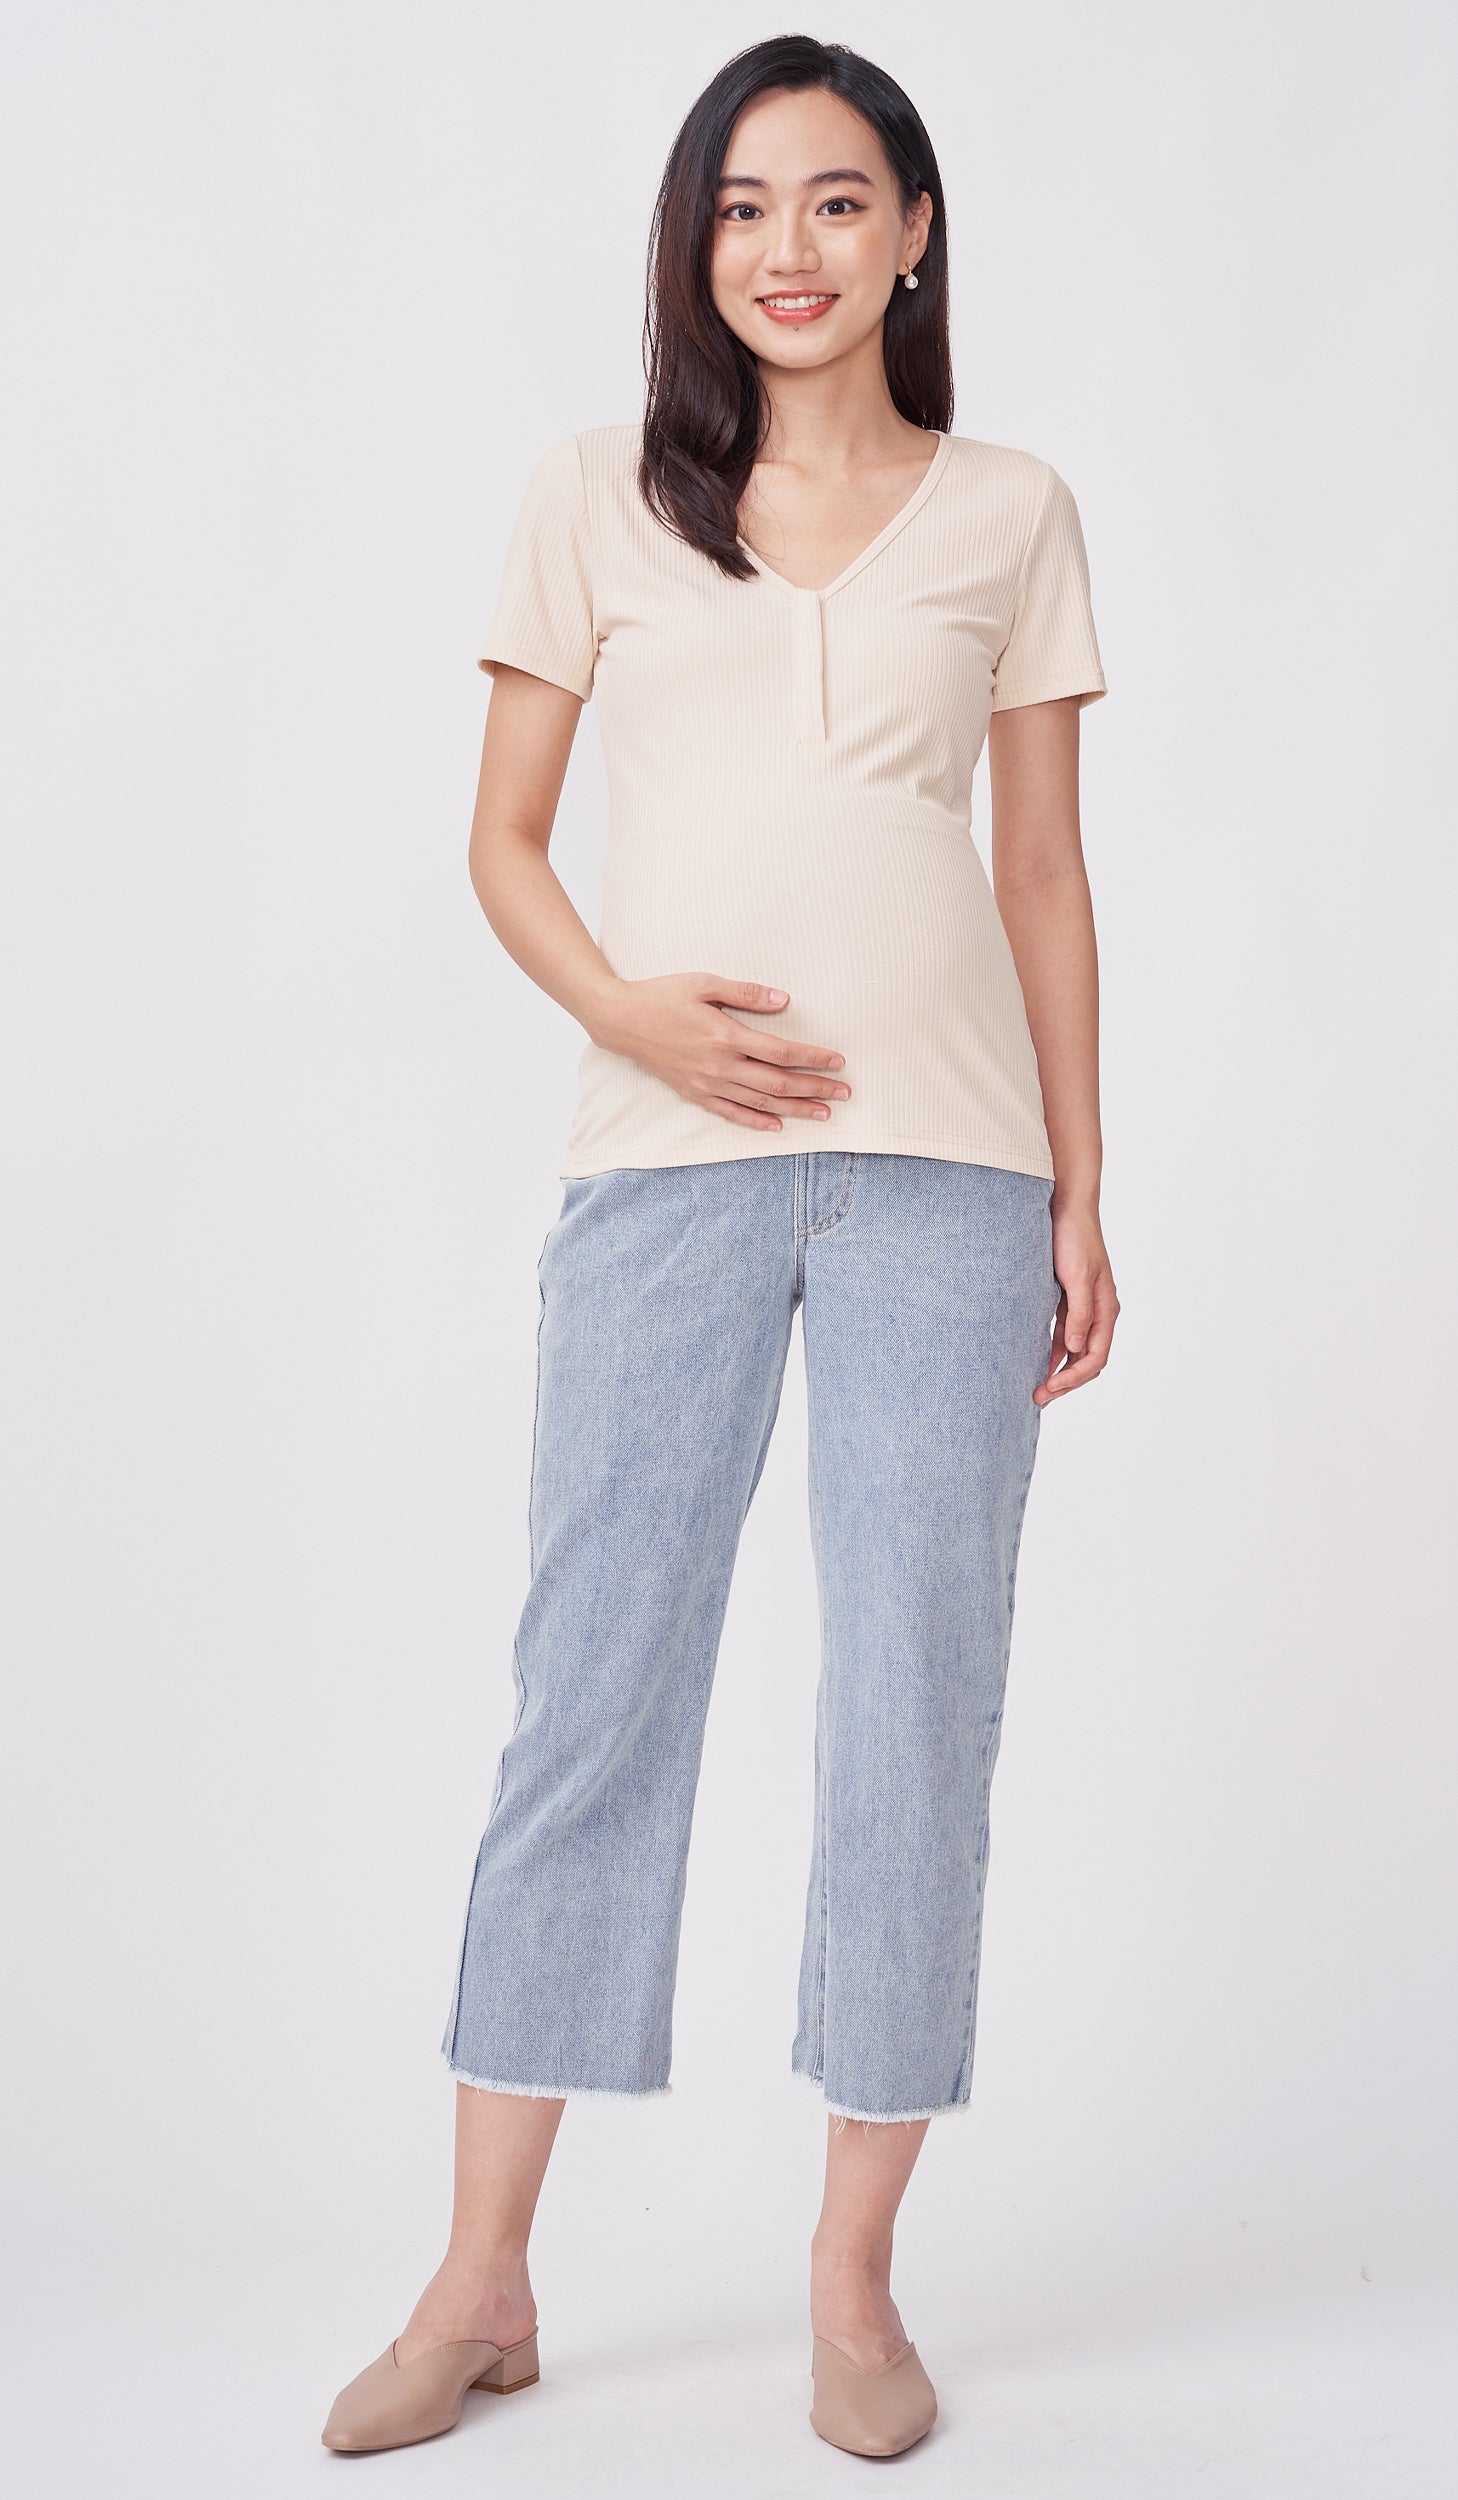 Best Maternity Jeans of 2022